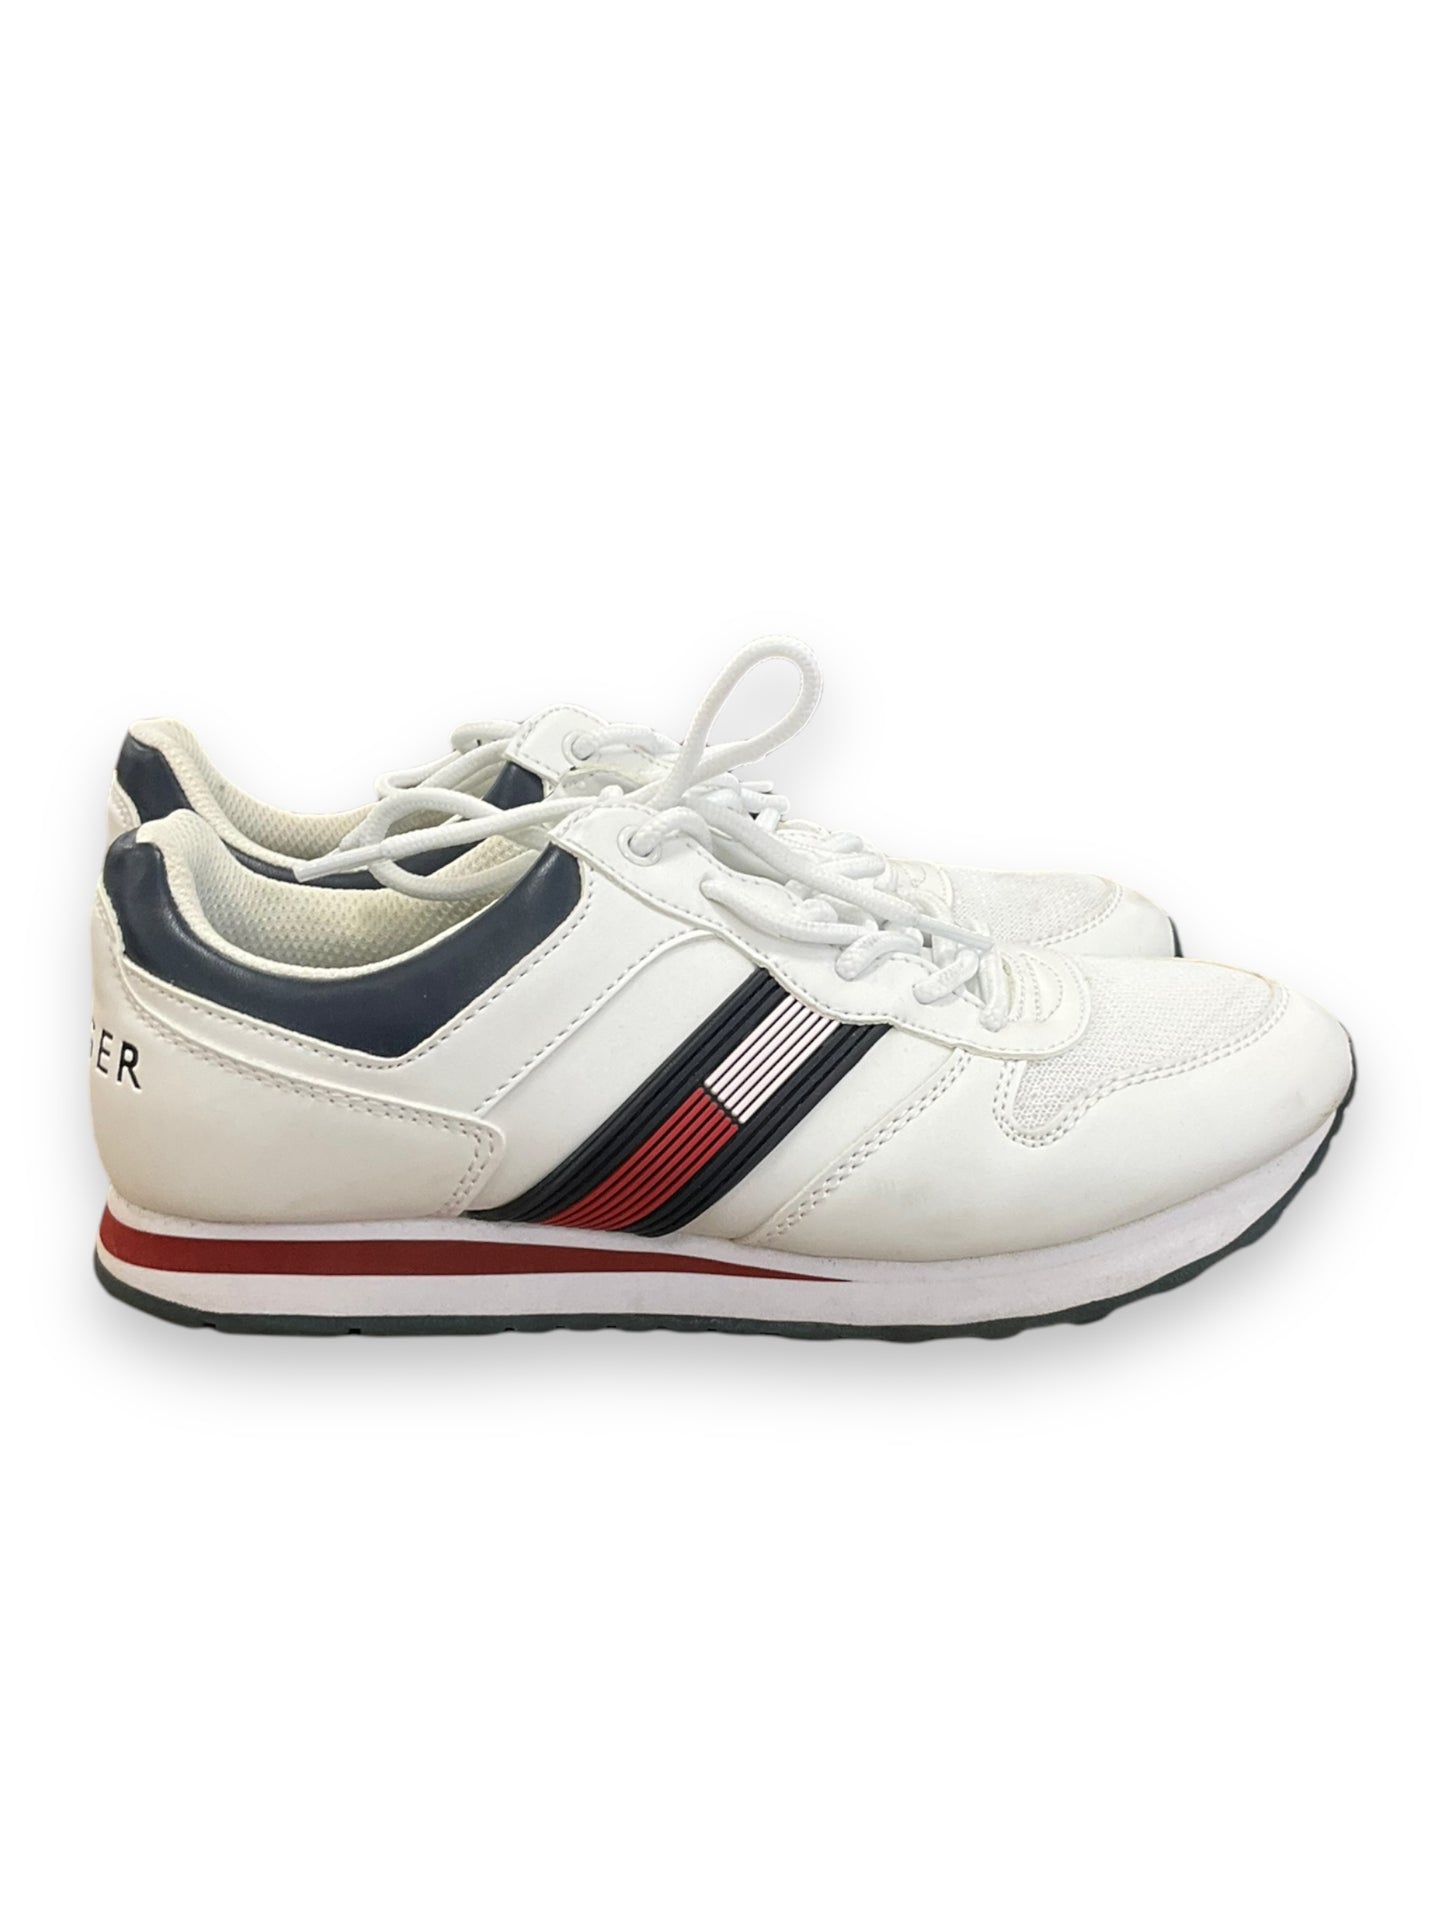 Shoes Sneakers By Tommy Hilfiger  Size: 7.5